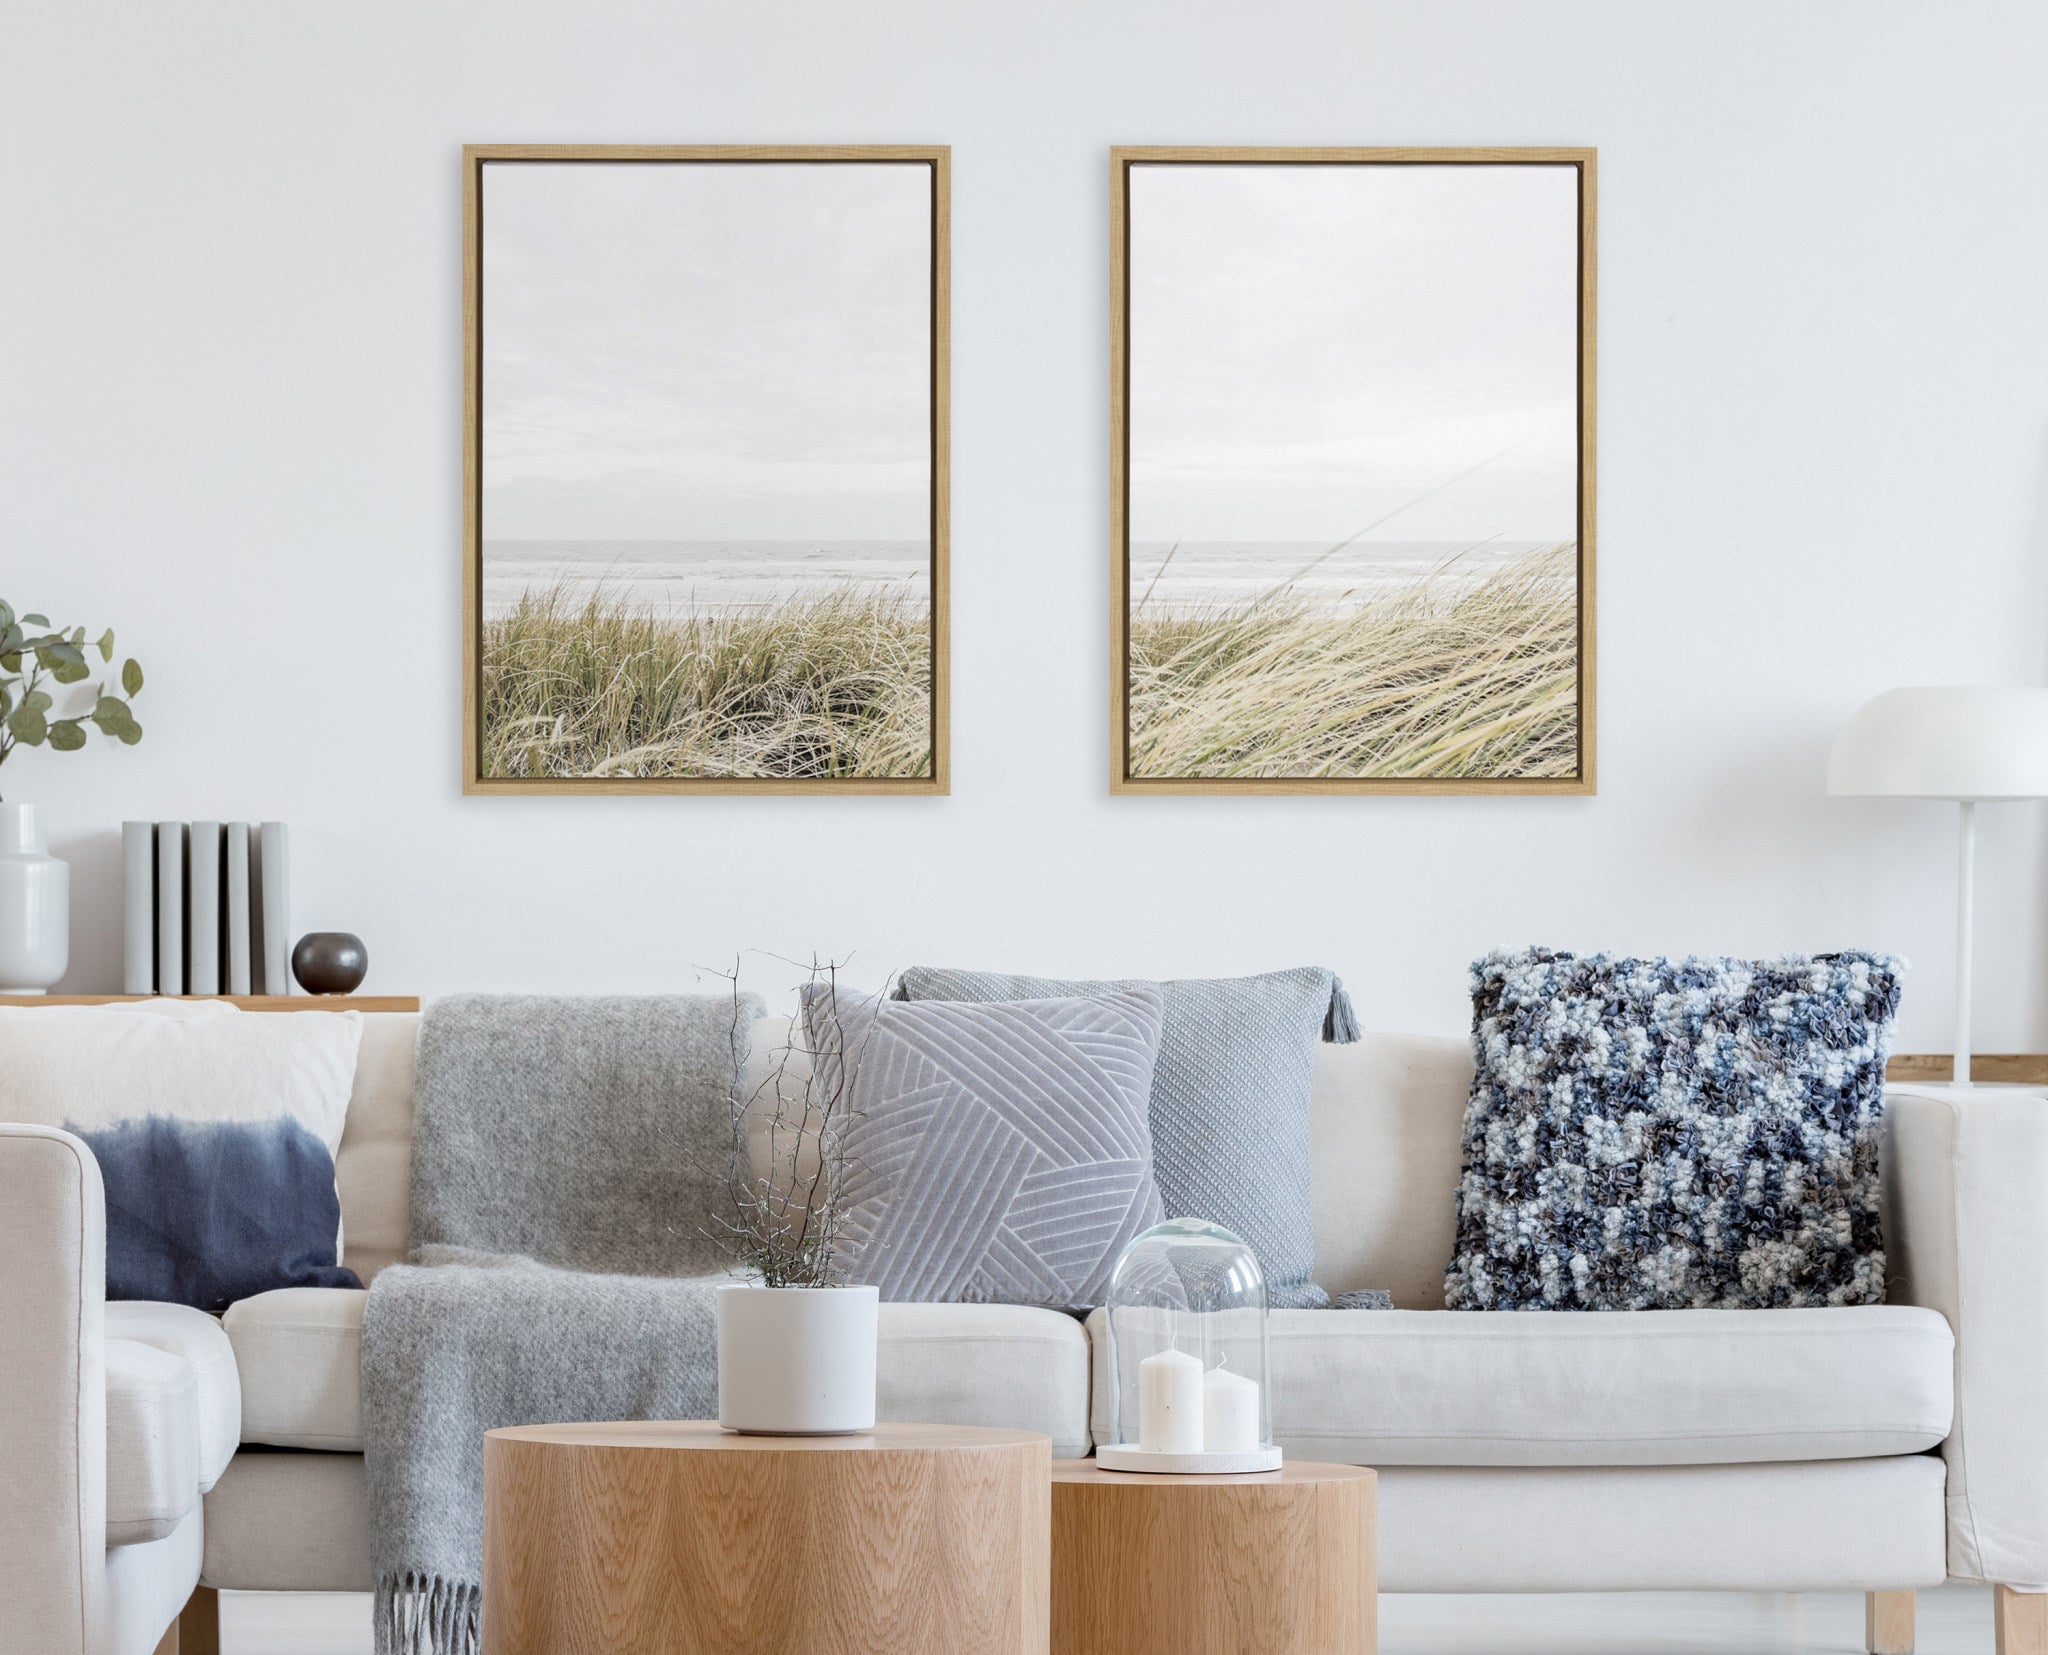 Sylvie East Beach Left and Right Framed Canvas by Amy Peterson Art Studio